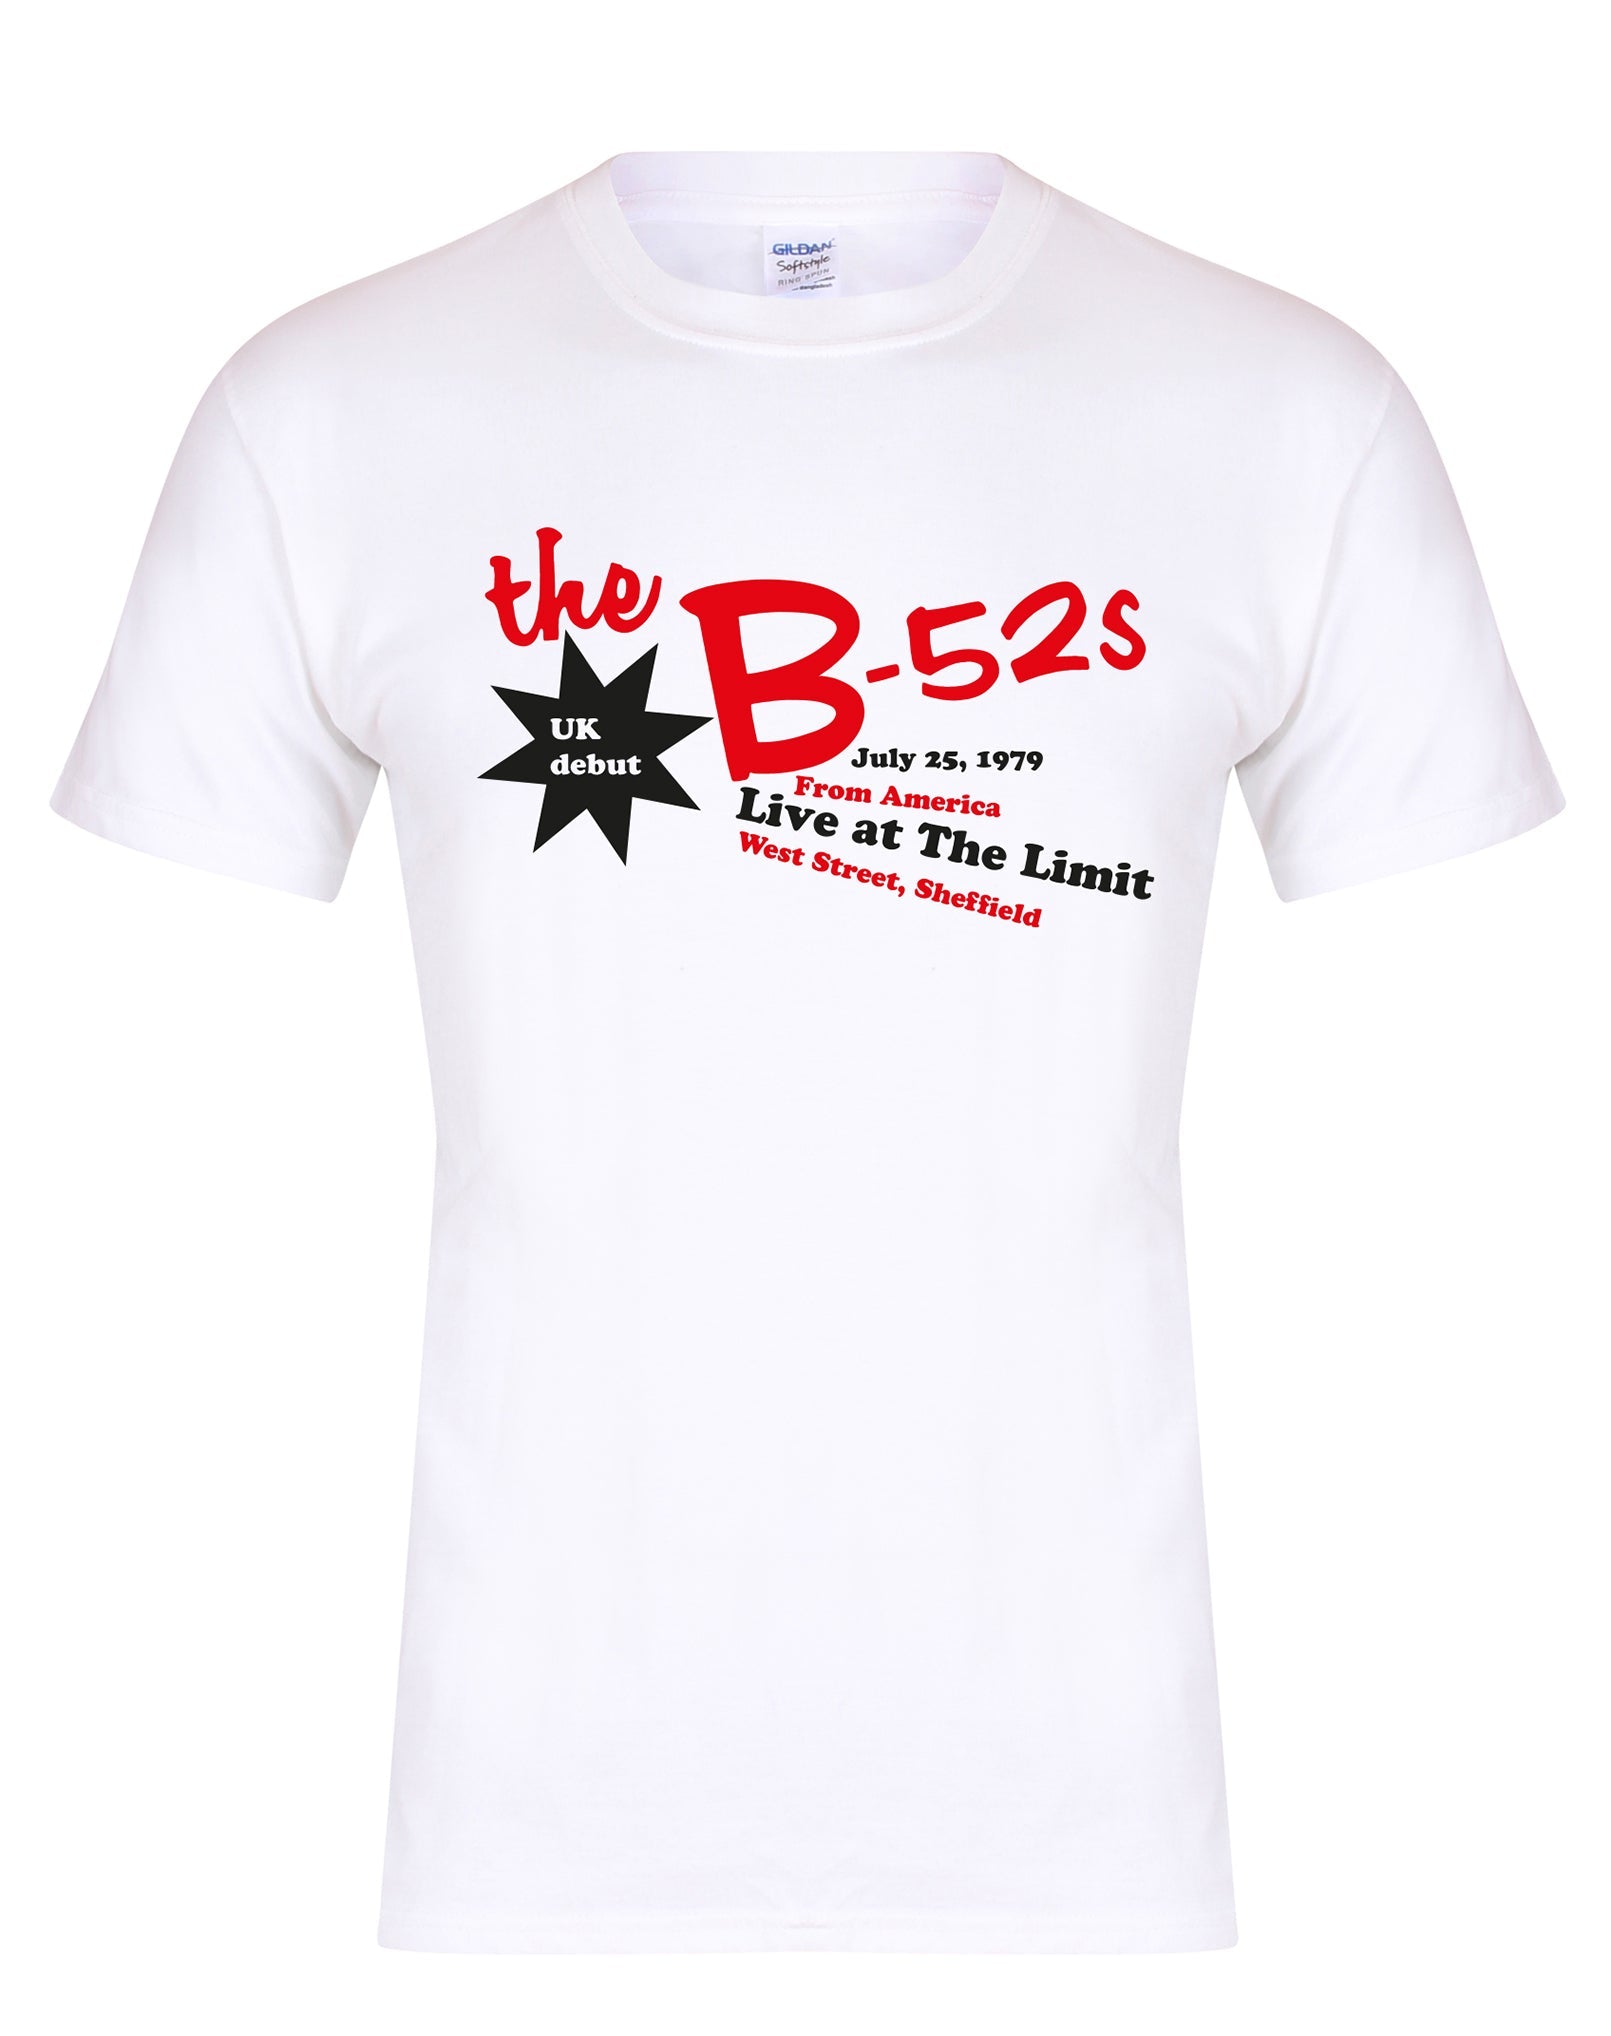 B-52's at the Limit - unisex fit T-shirt - various colours - Dirty Stop Outs